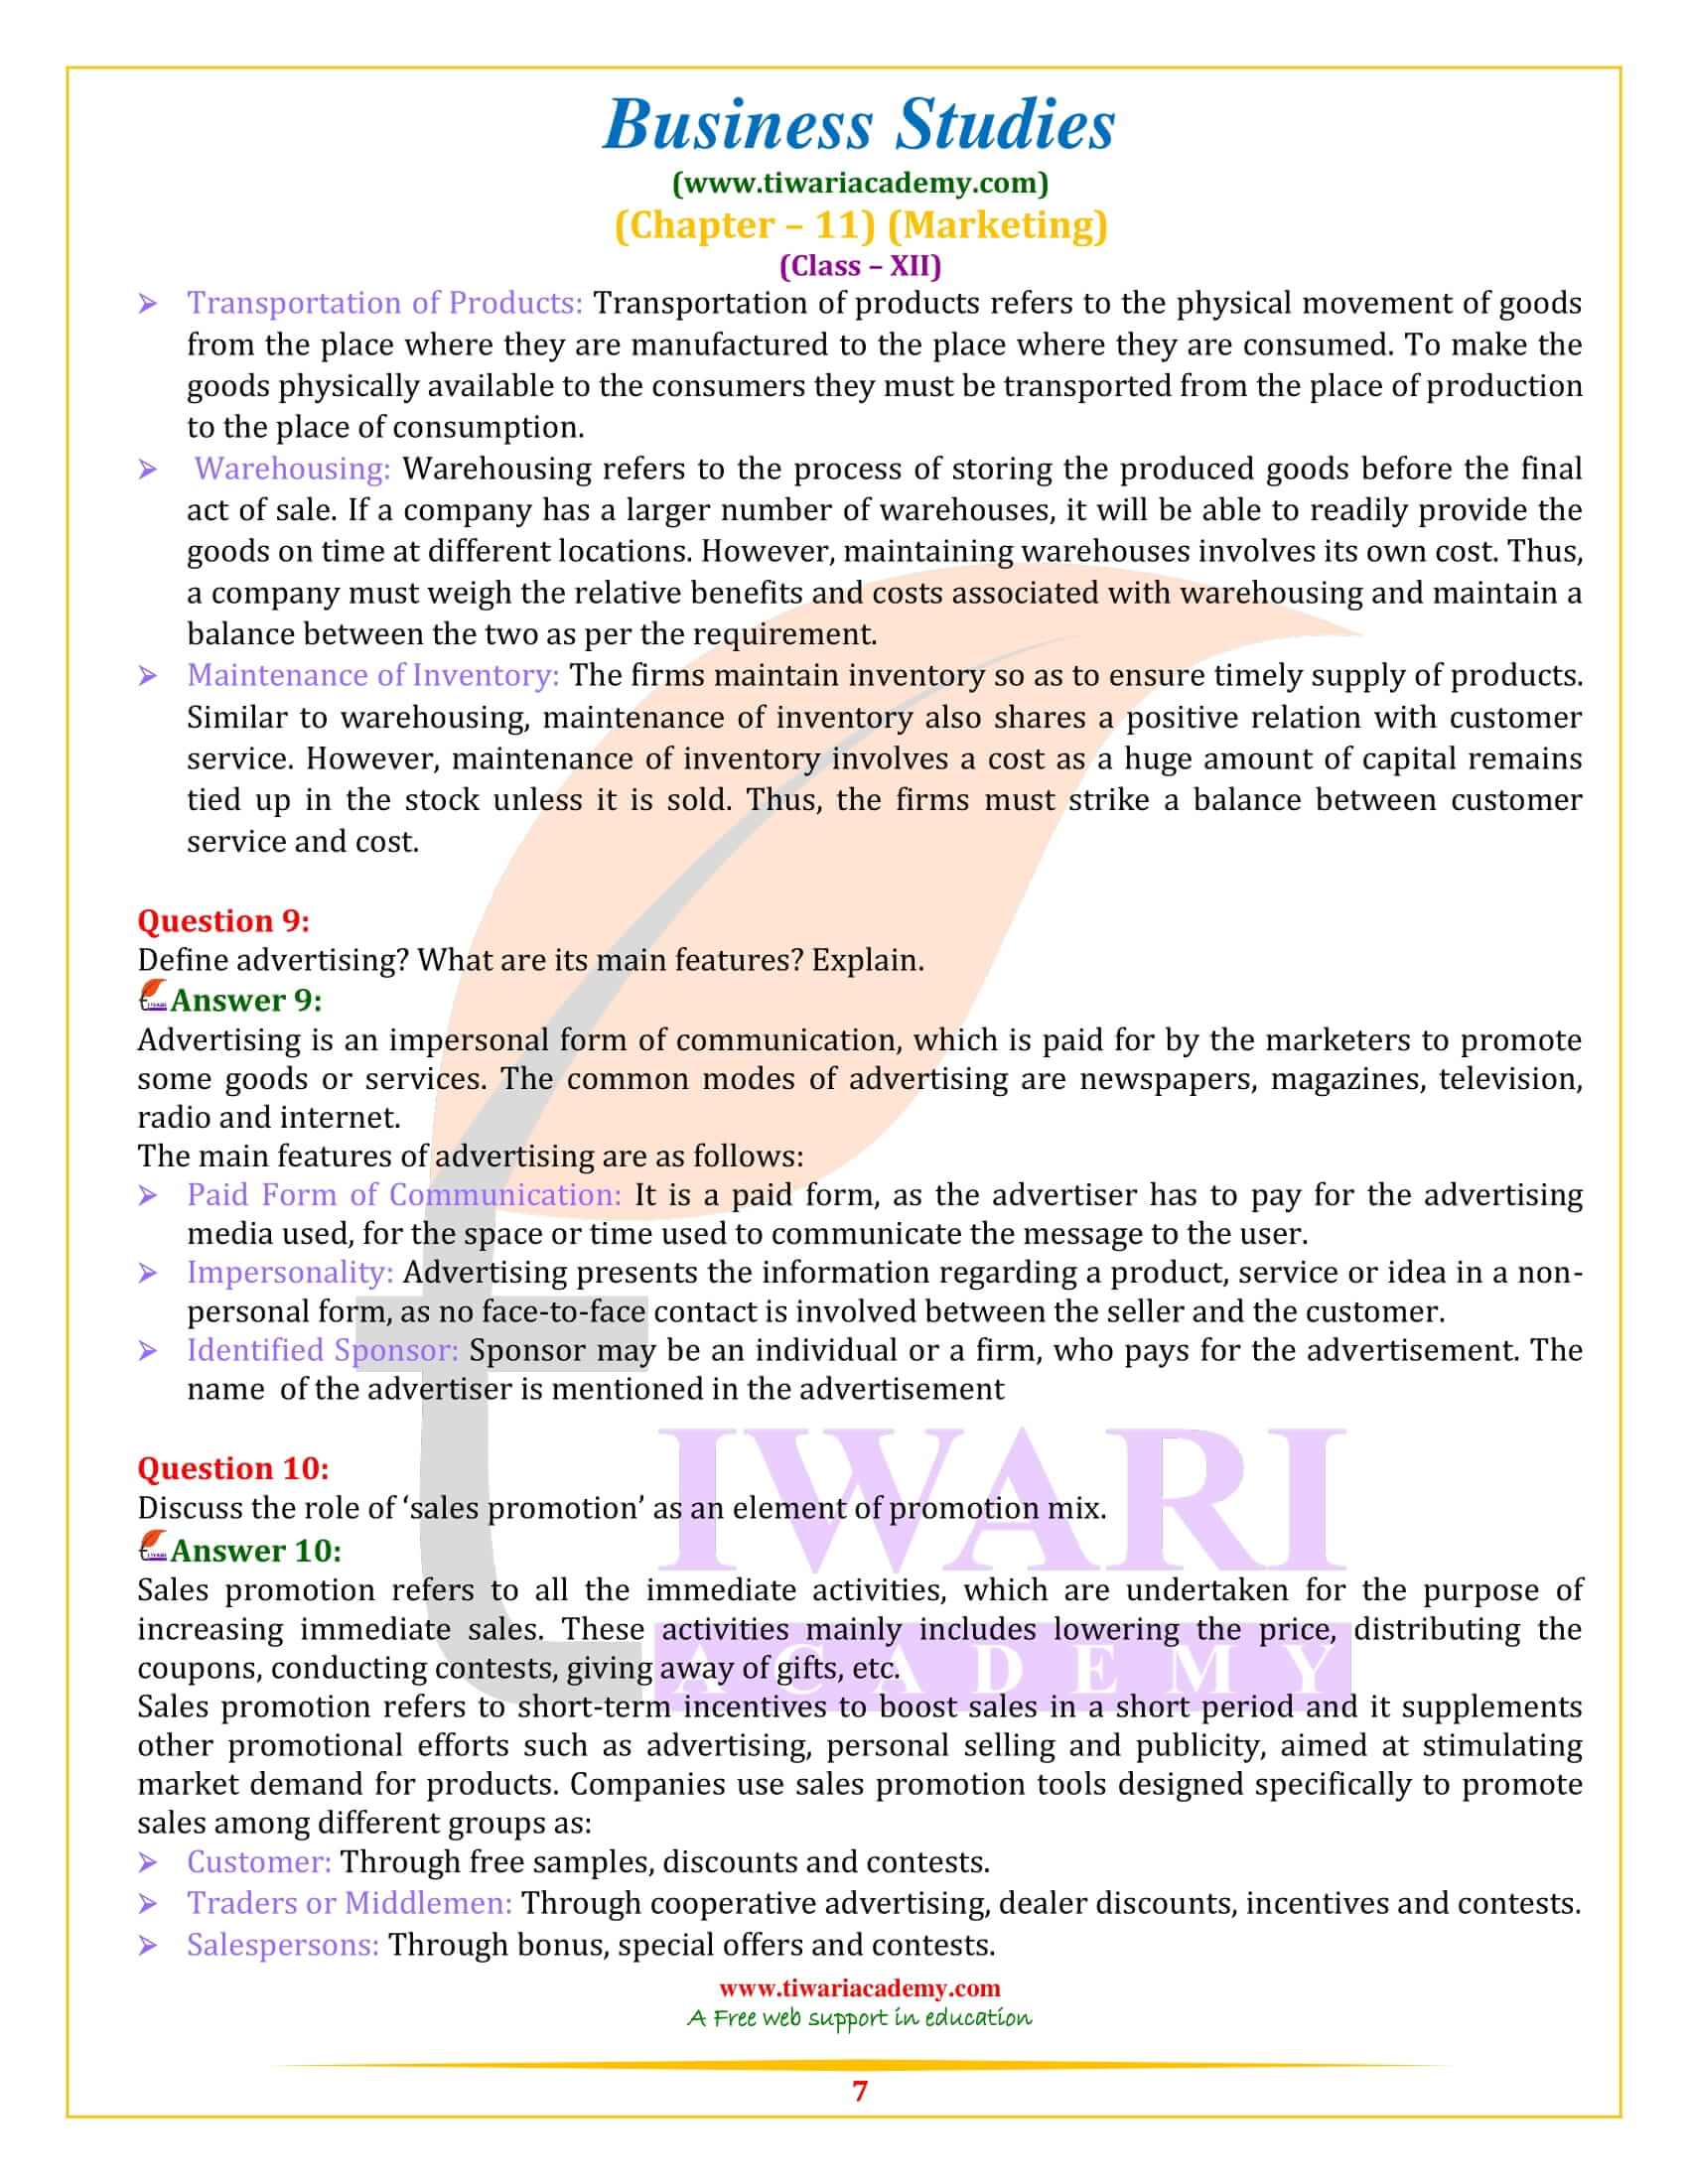 NCERT Solutions for Class 12 Business Studies Chapter 11 question answers